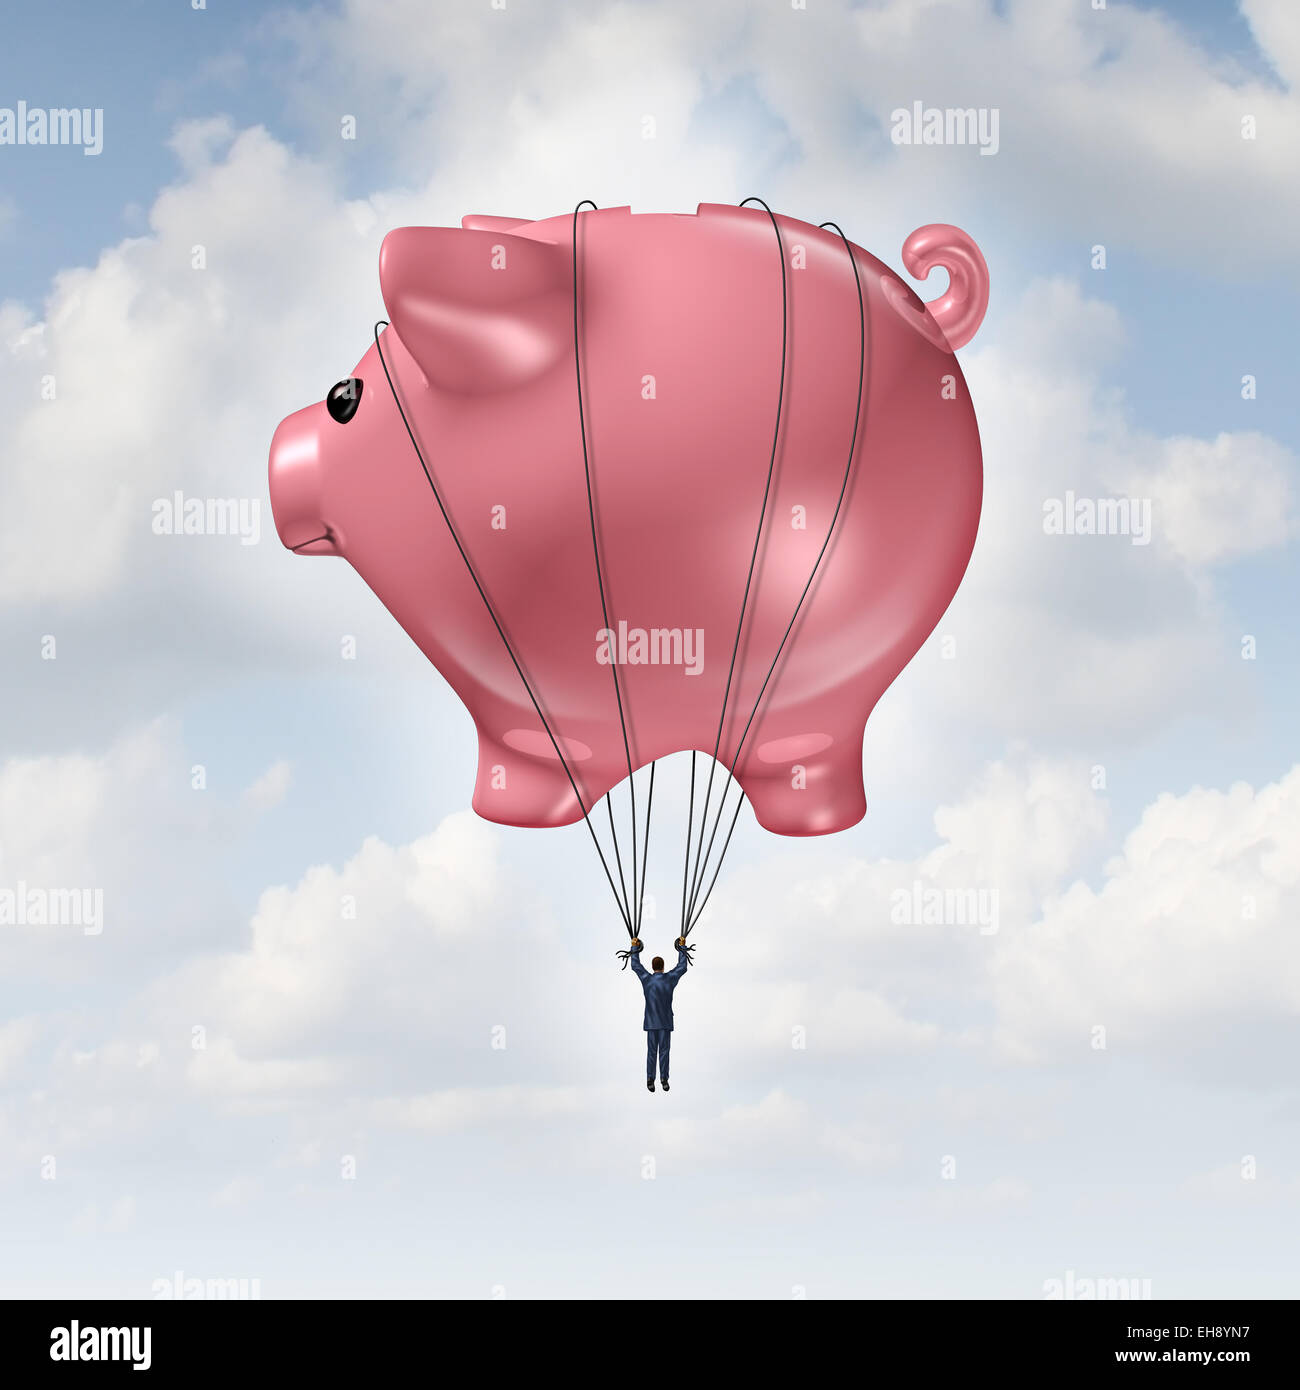 Financial freedom concept as a piggy bank hot air balloon lifting a businessman up to success as a wealth management and investment advice metaphor. Stock Photo